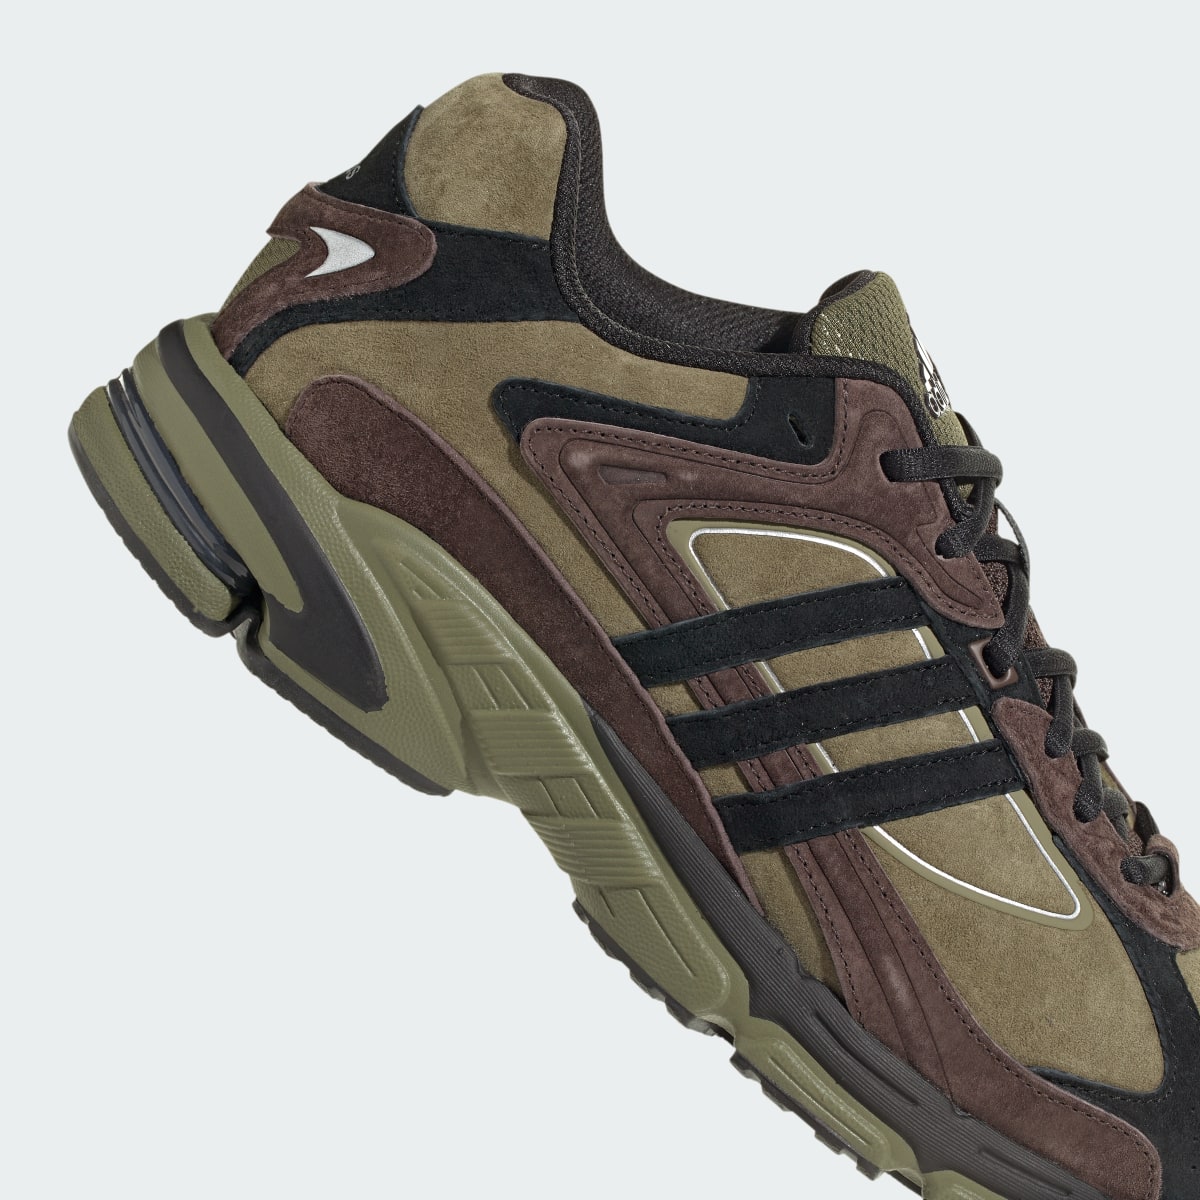 Adidas Chaussure Response CL. 10